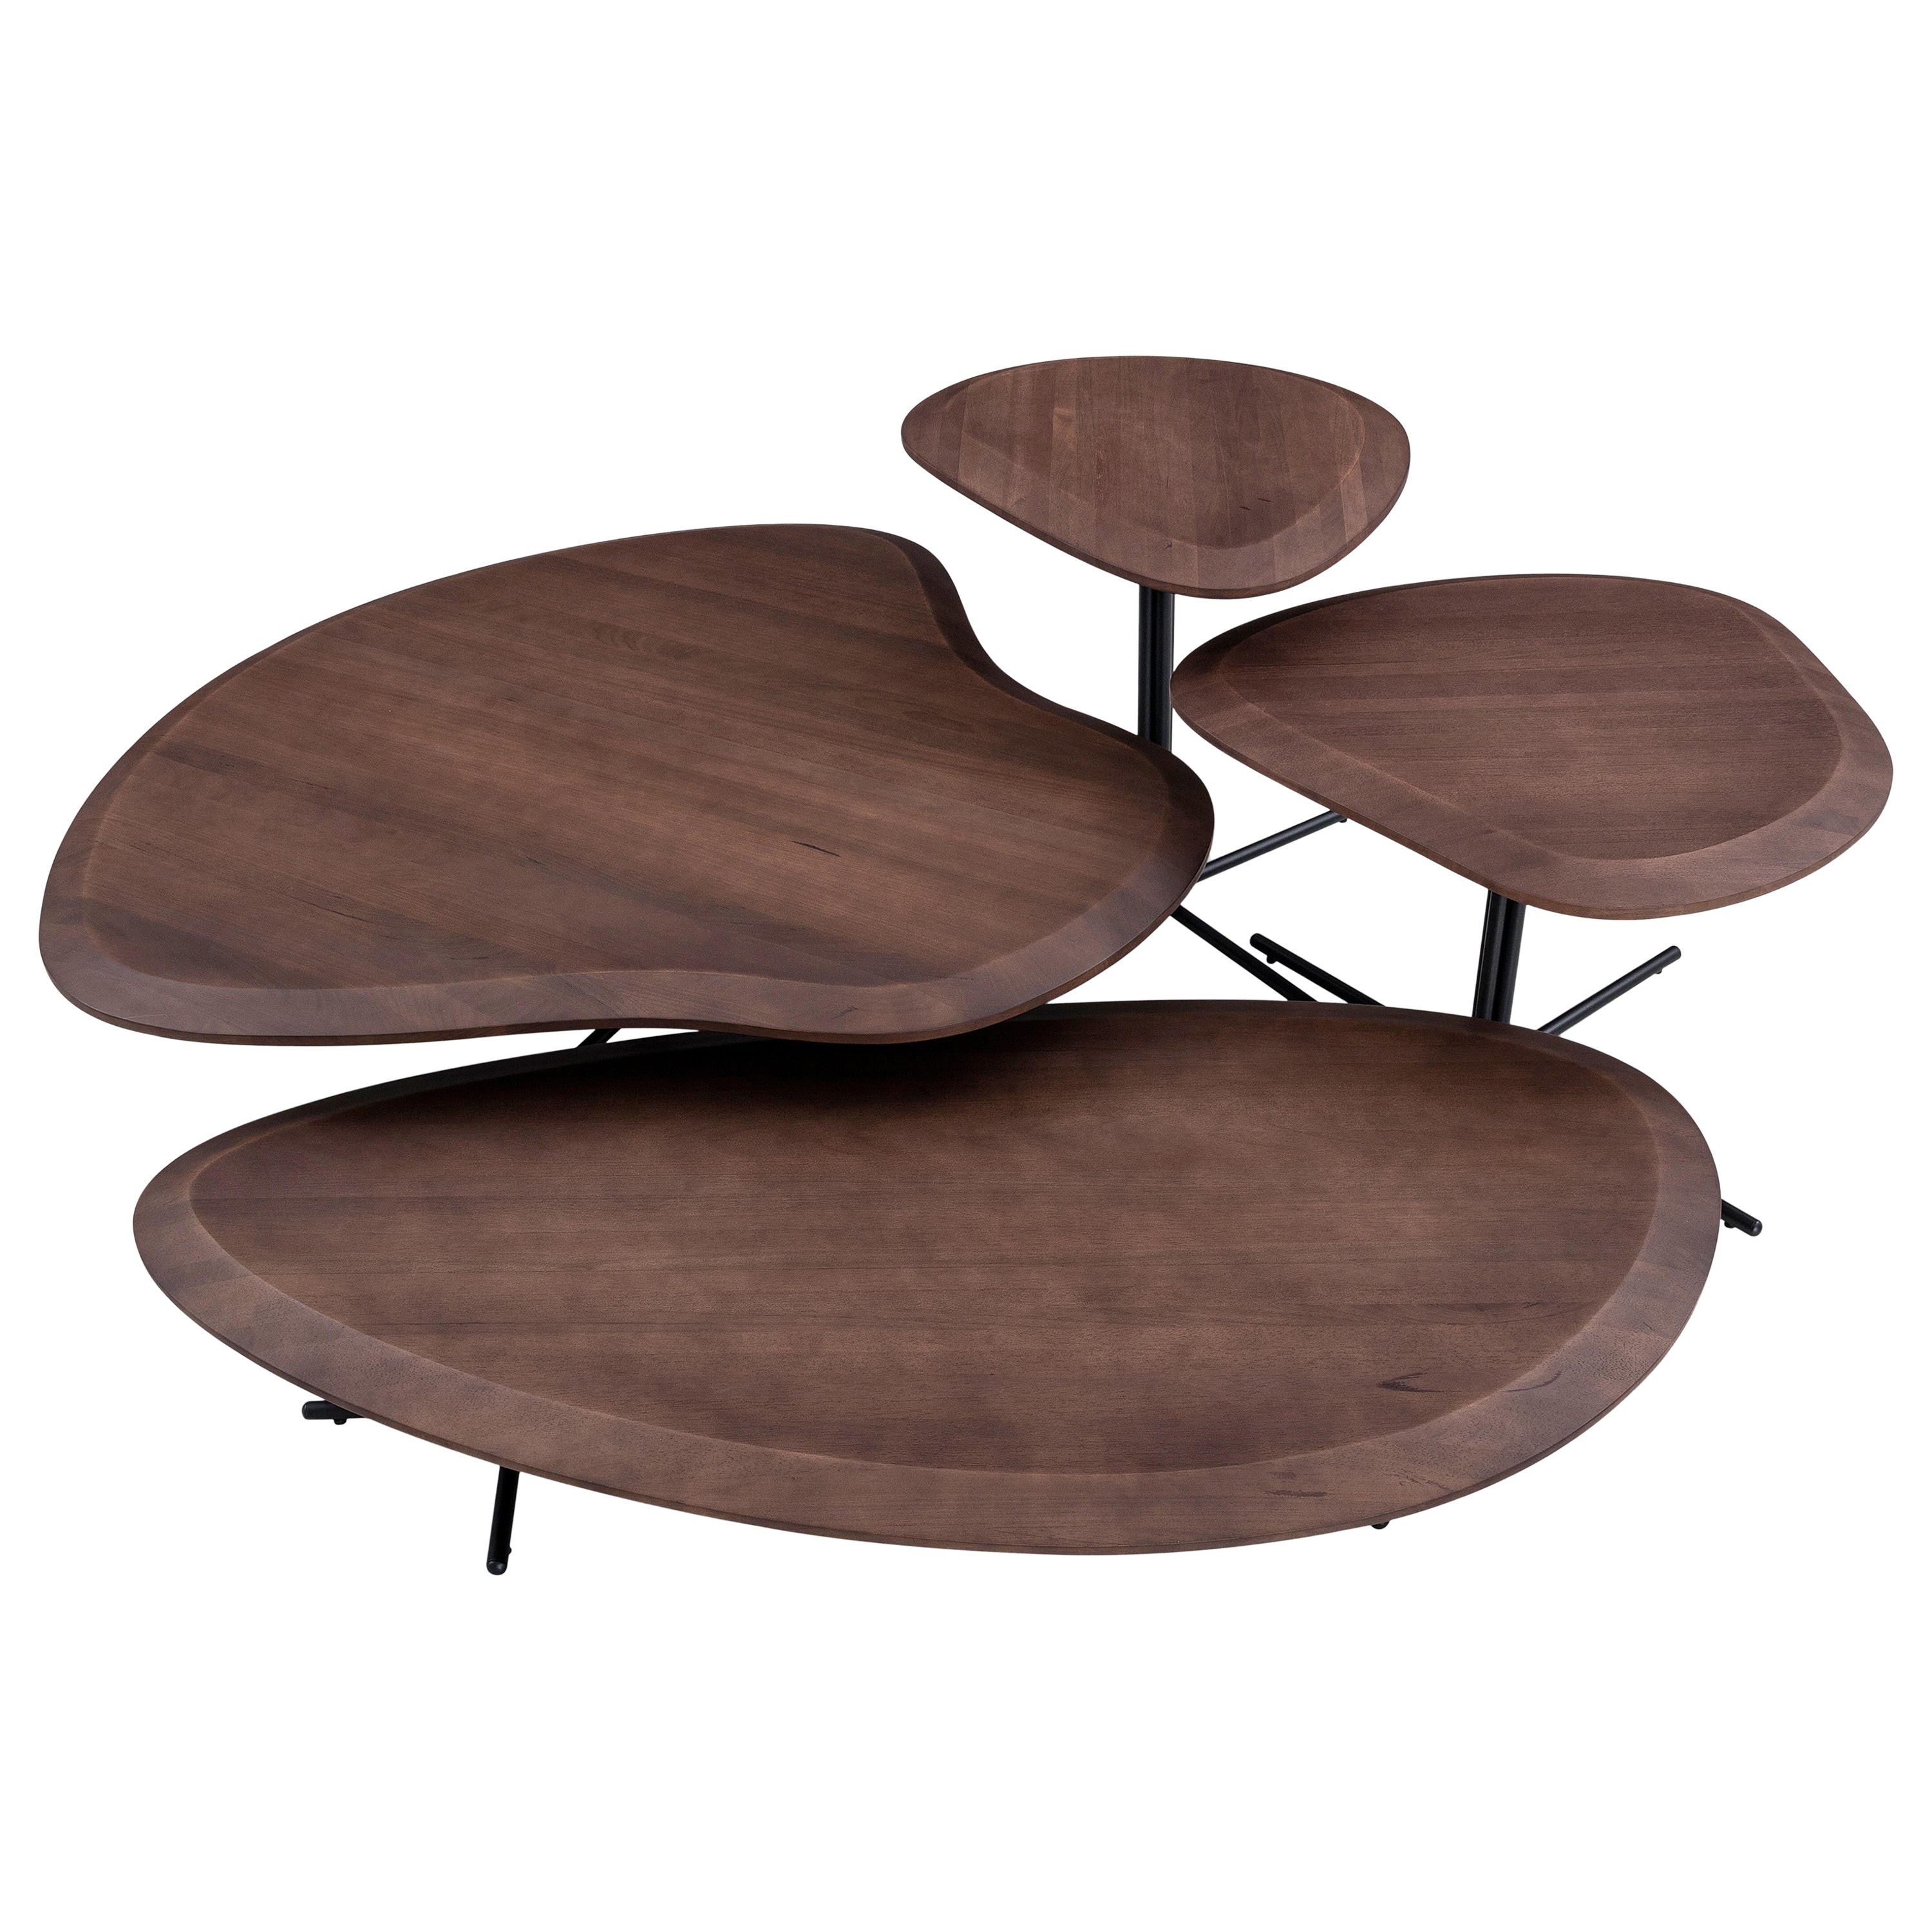 Pante Coffee Table in Walnut Wood Finish and Black Legs, Set of 4 For Sale